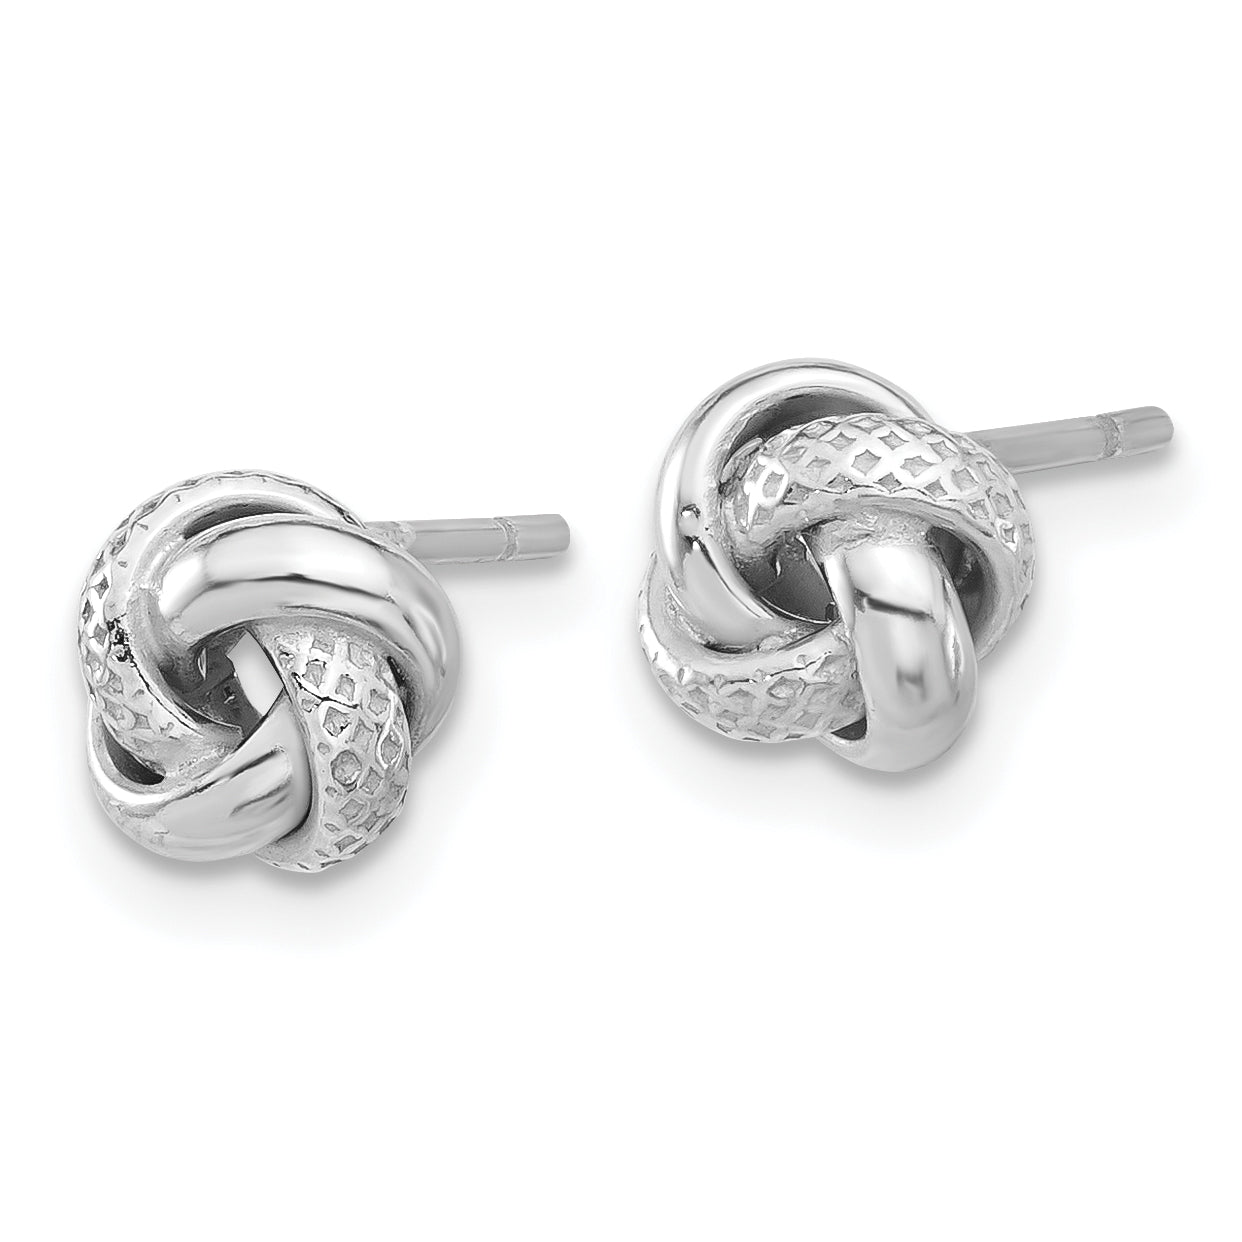 Sterling Silver Rhodium-plated Polished/Textured Love Knot Post Earrings